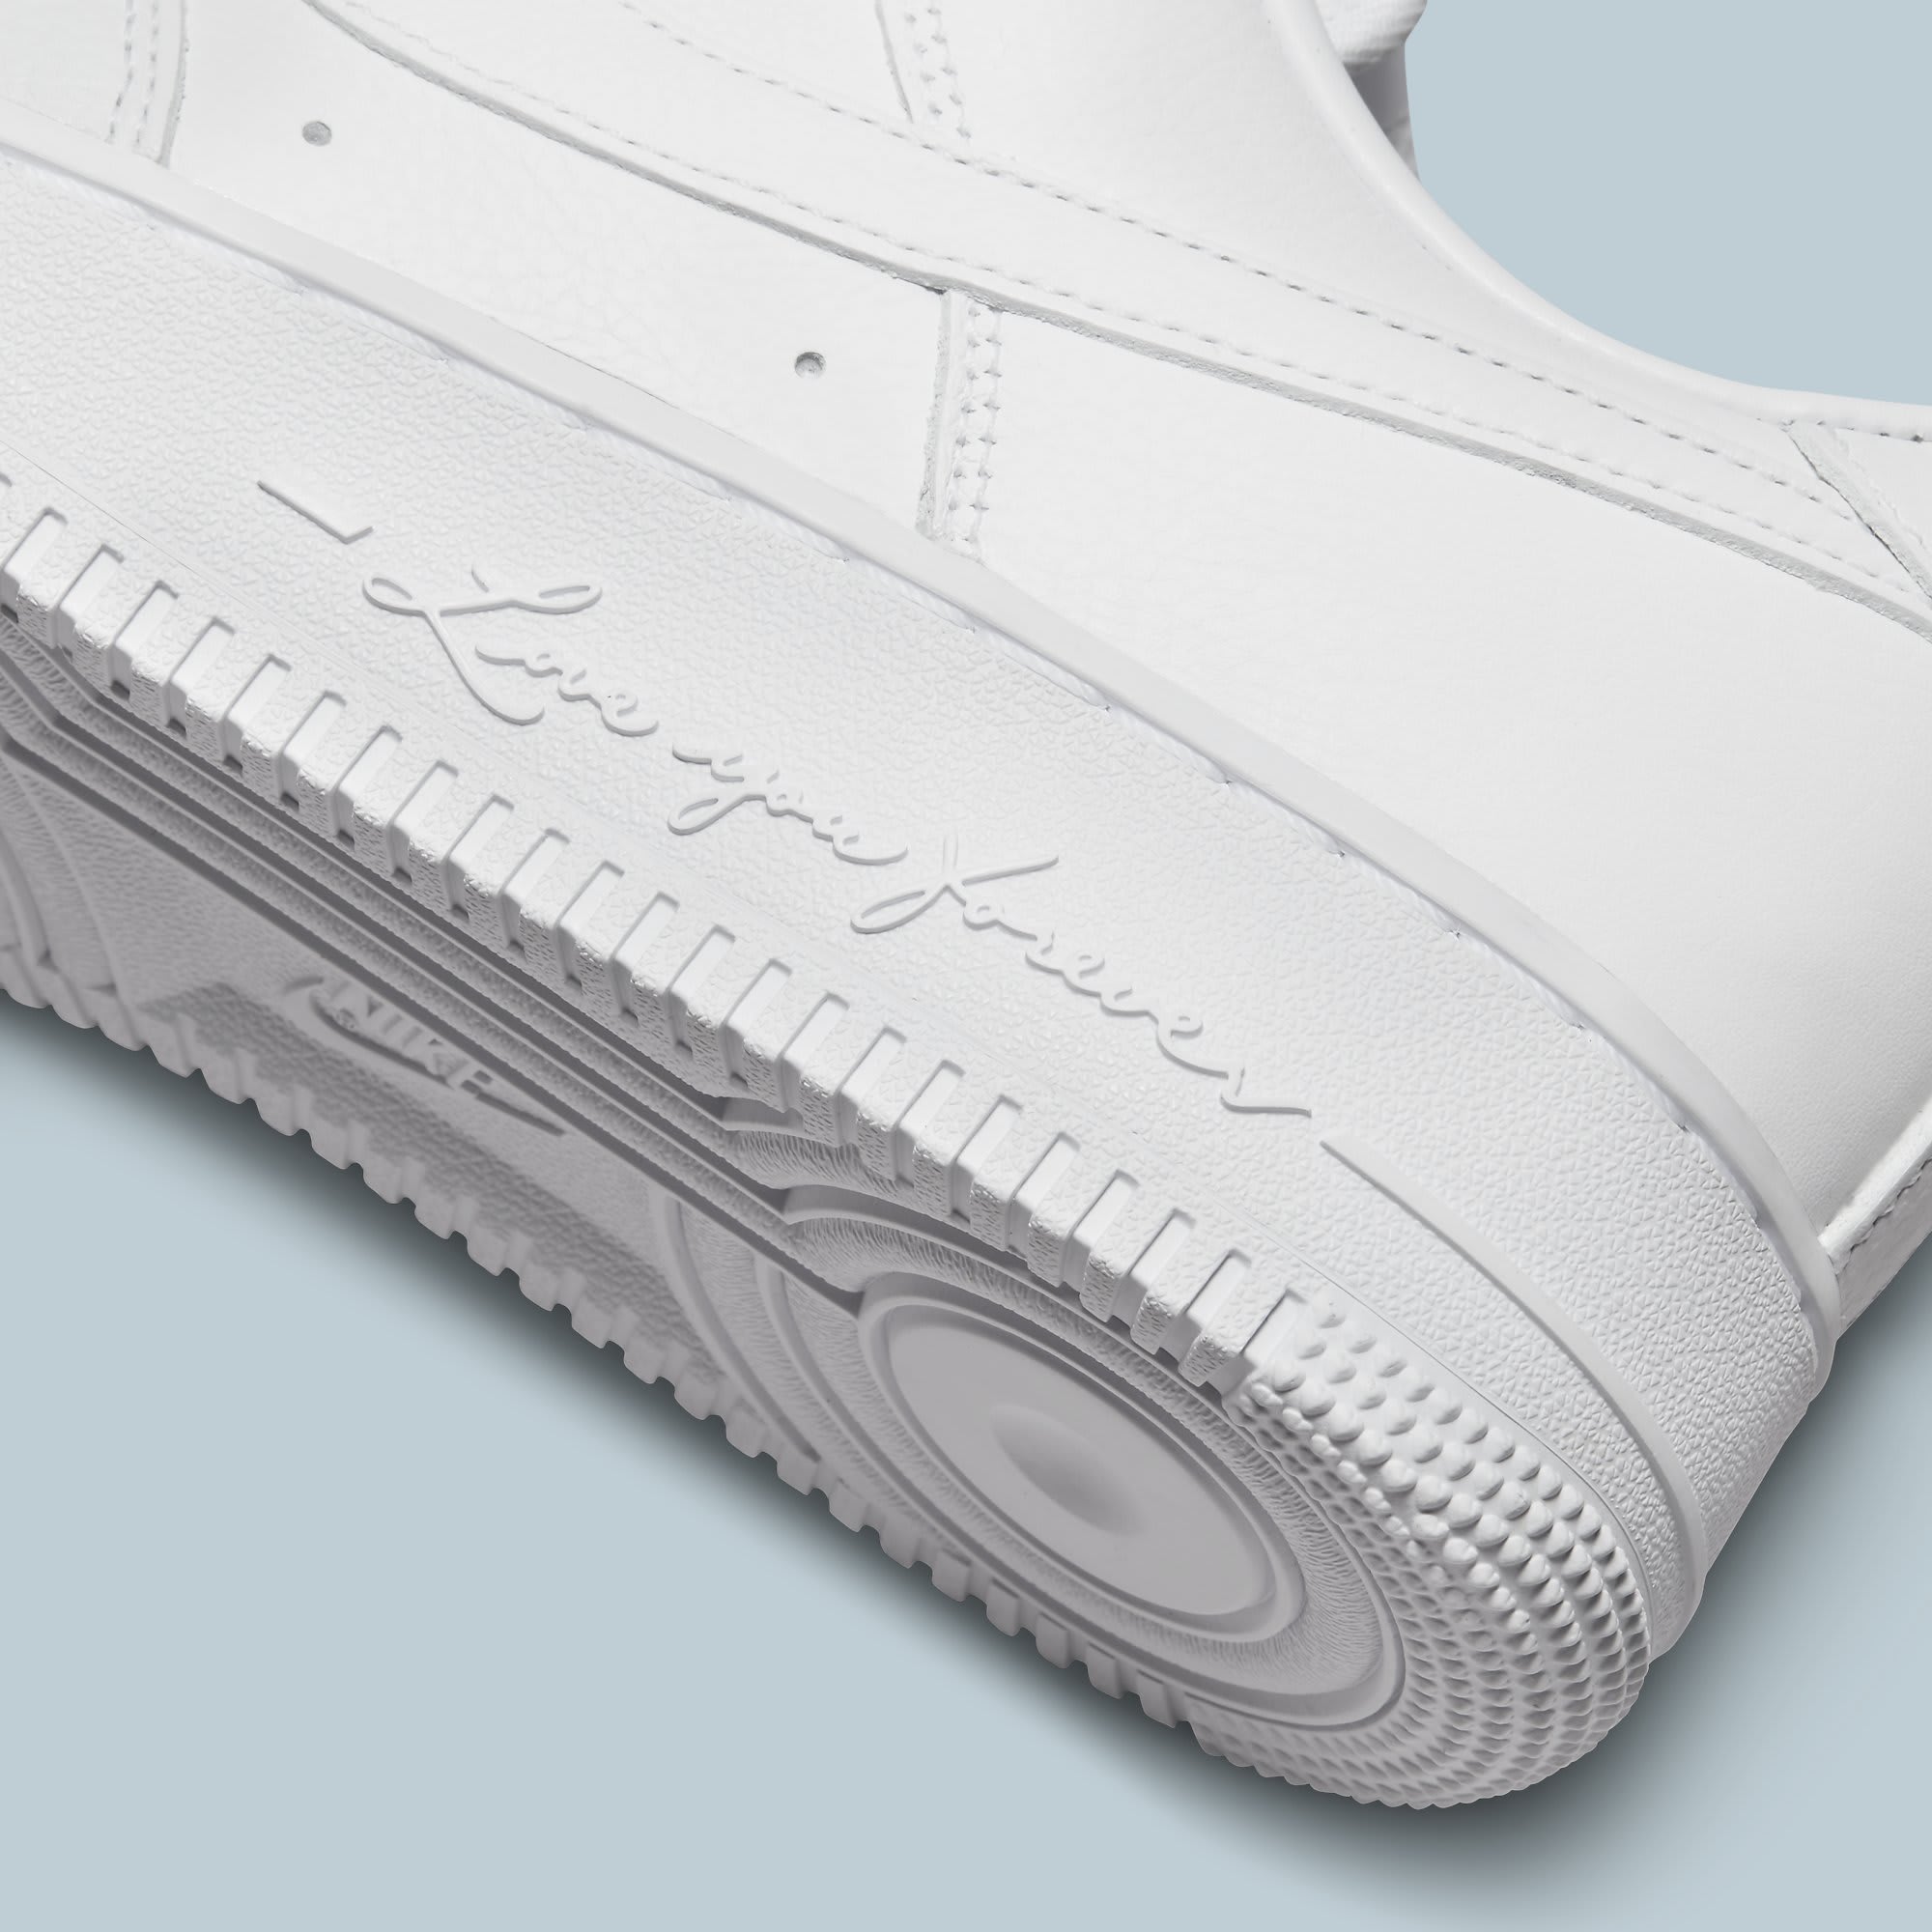 Drake Nocta x Nike Air Force 1 Low 'Certified Lover Boy' Release